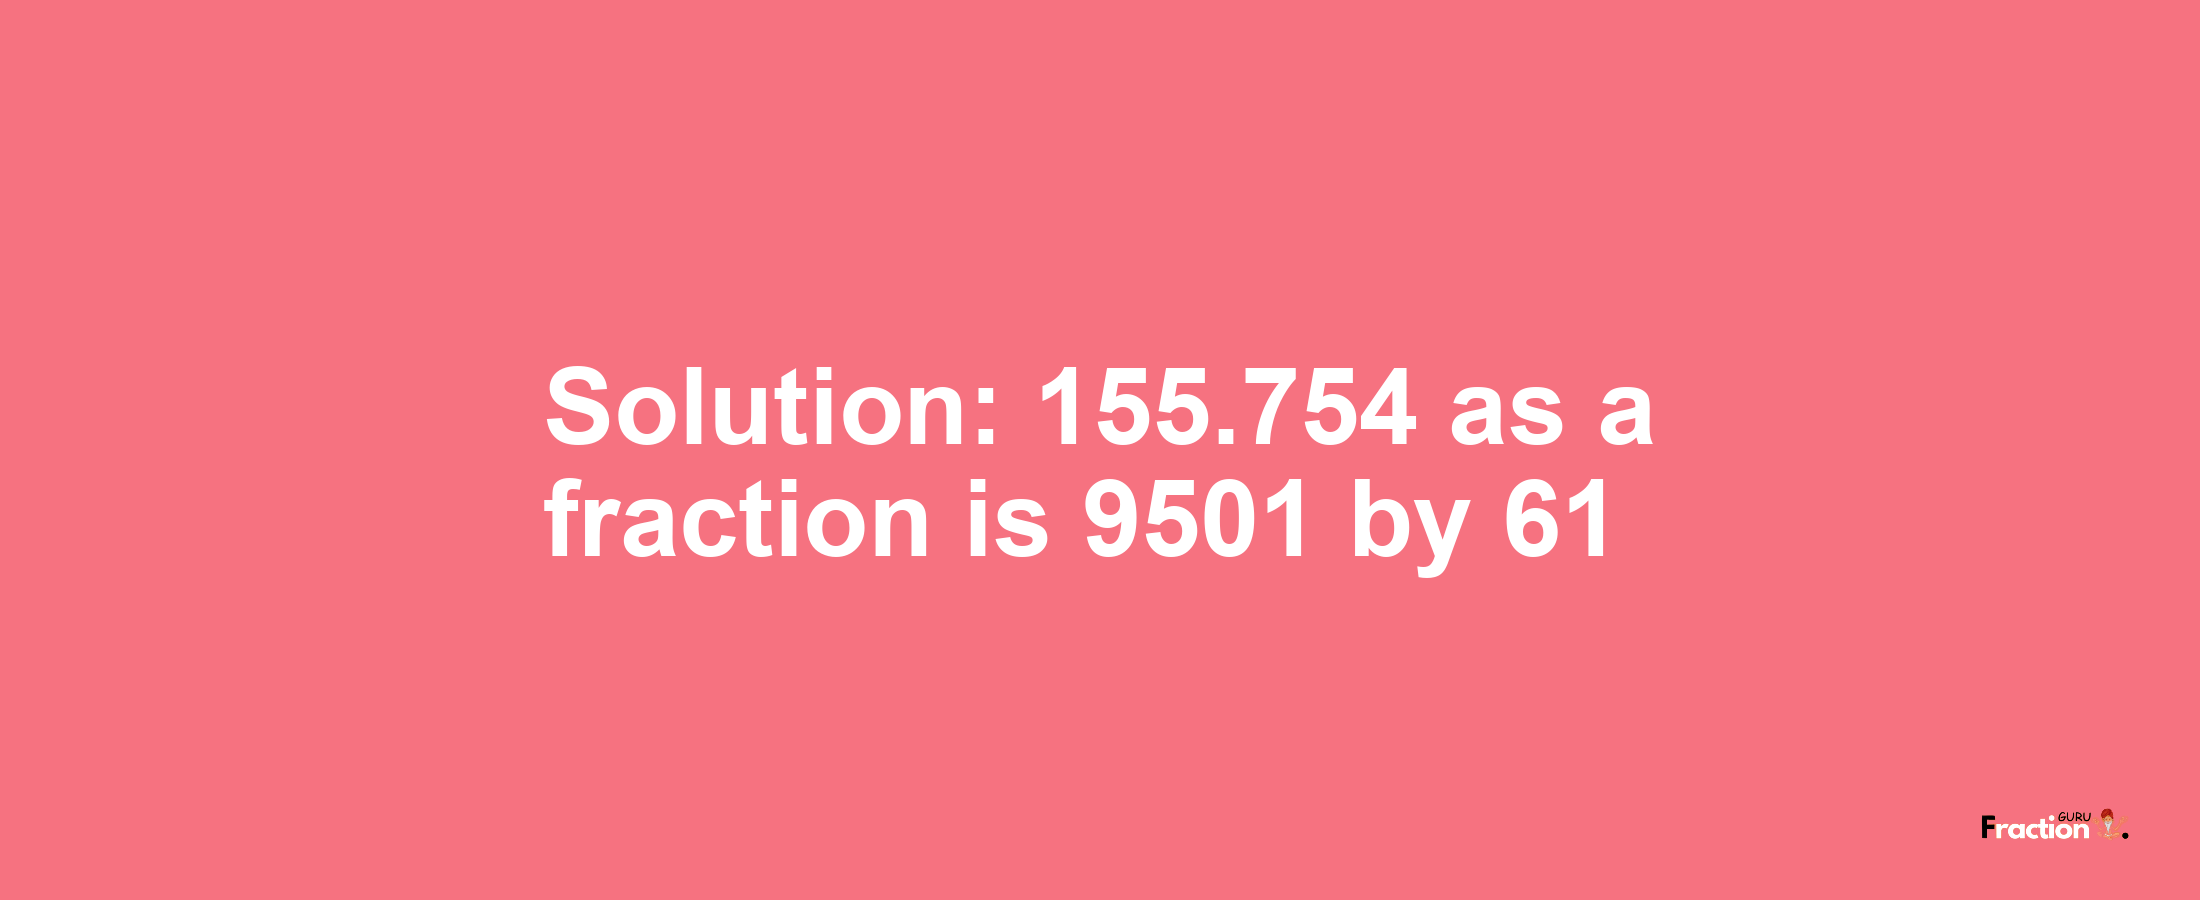 Solution:155.754 as a fraction is 9501/61